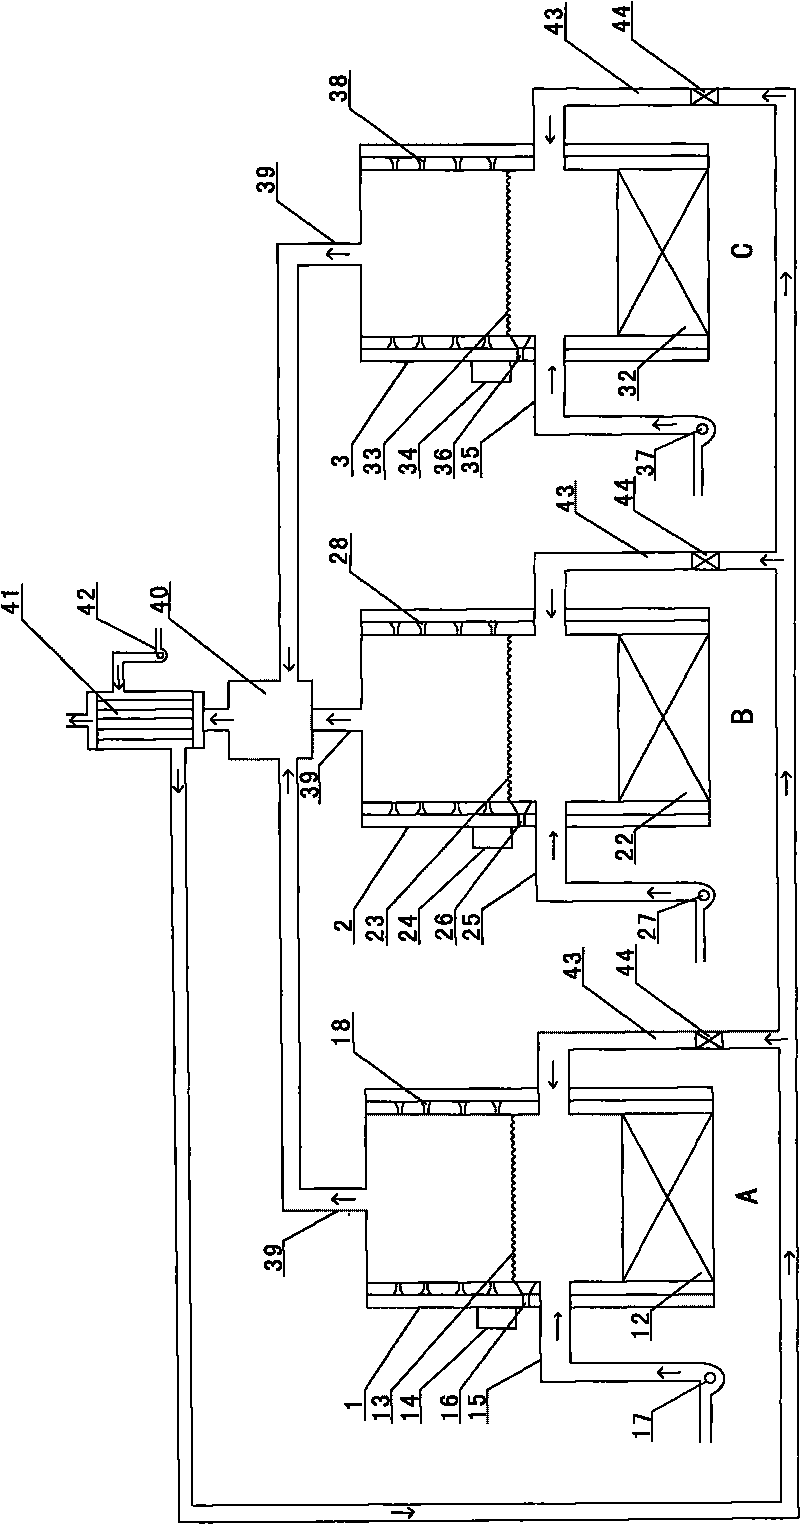 Circulating gasifying and pyrolyzing incinerator system and incinerating method